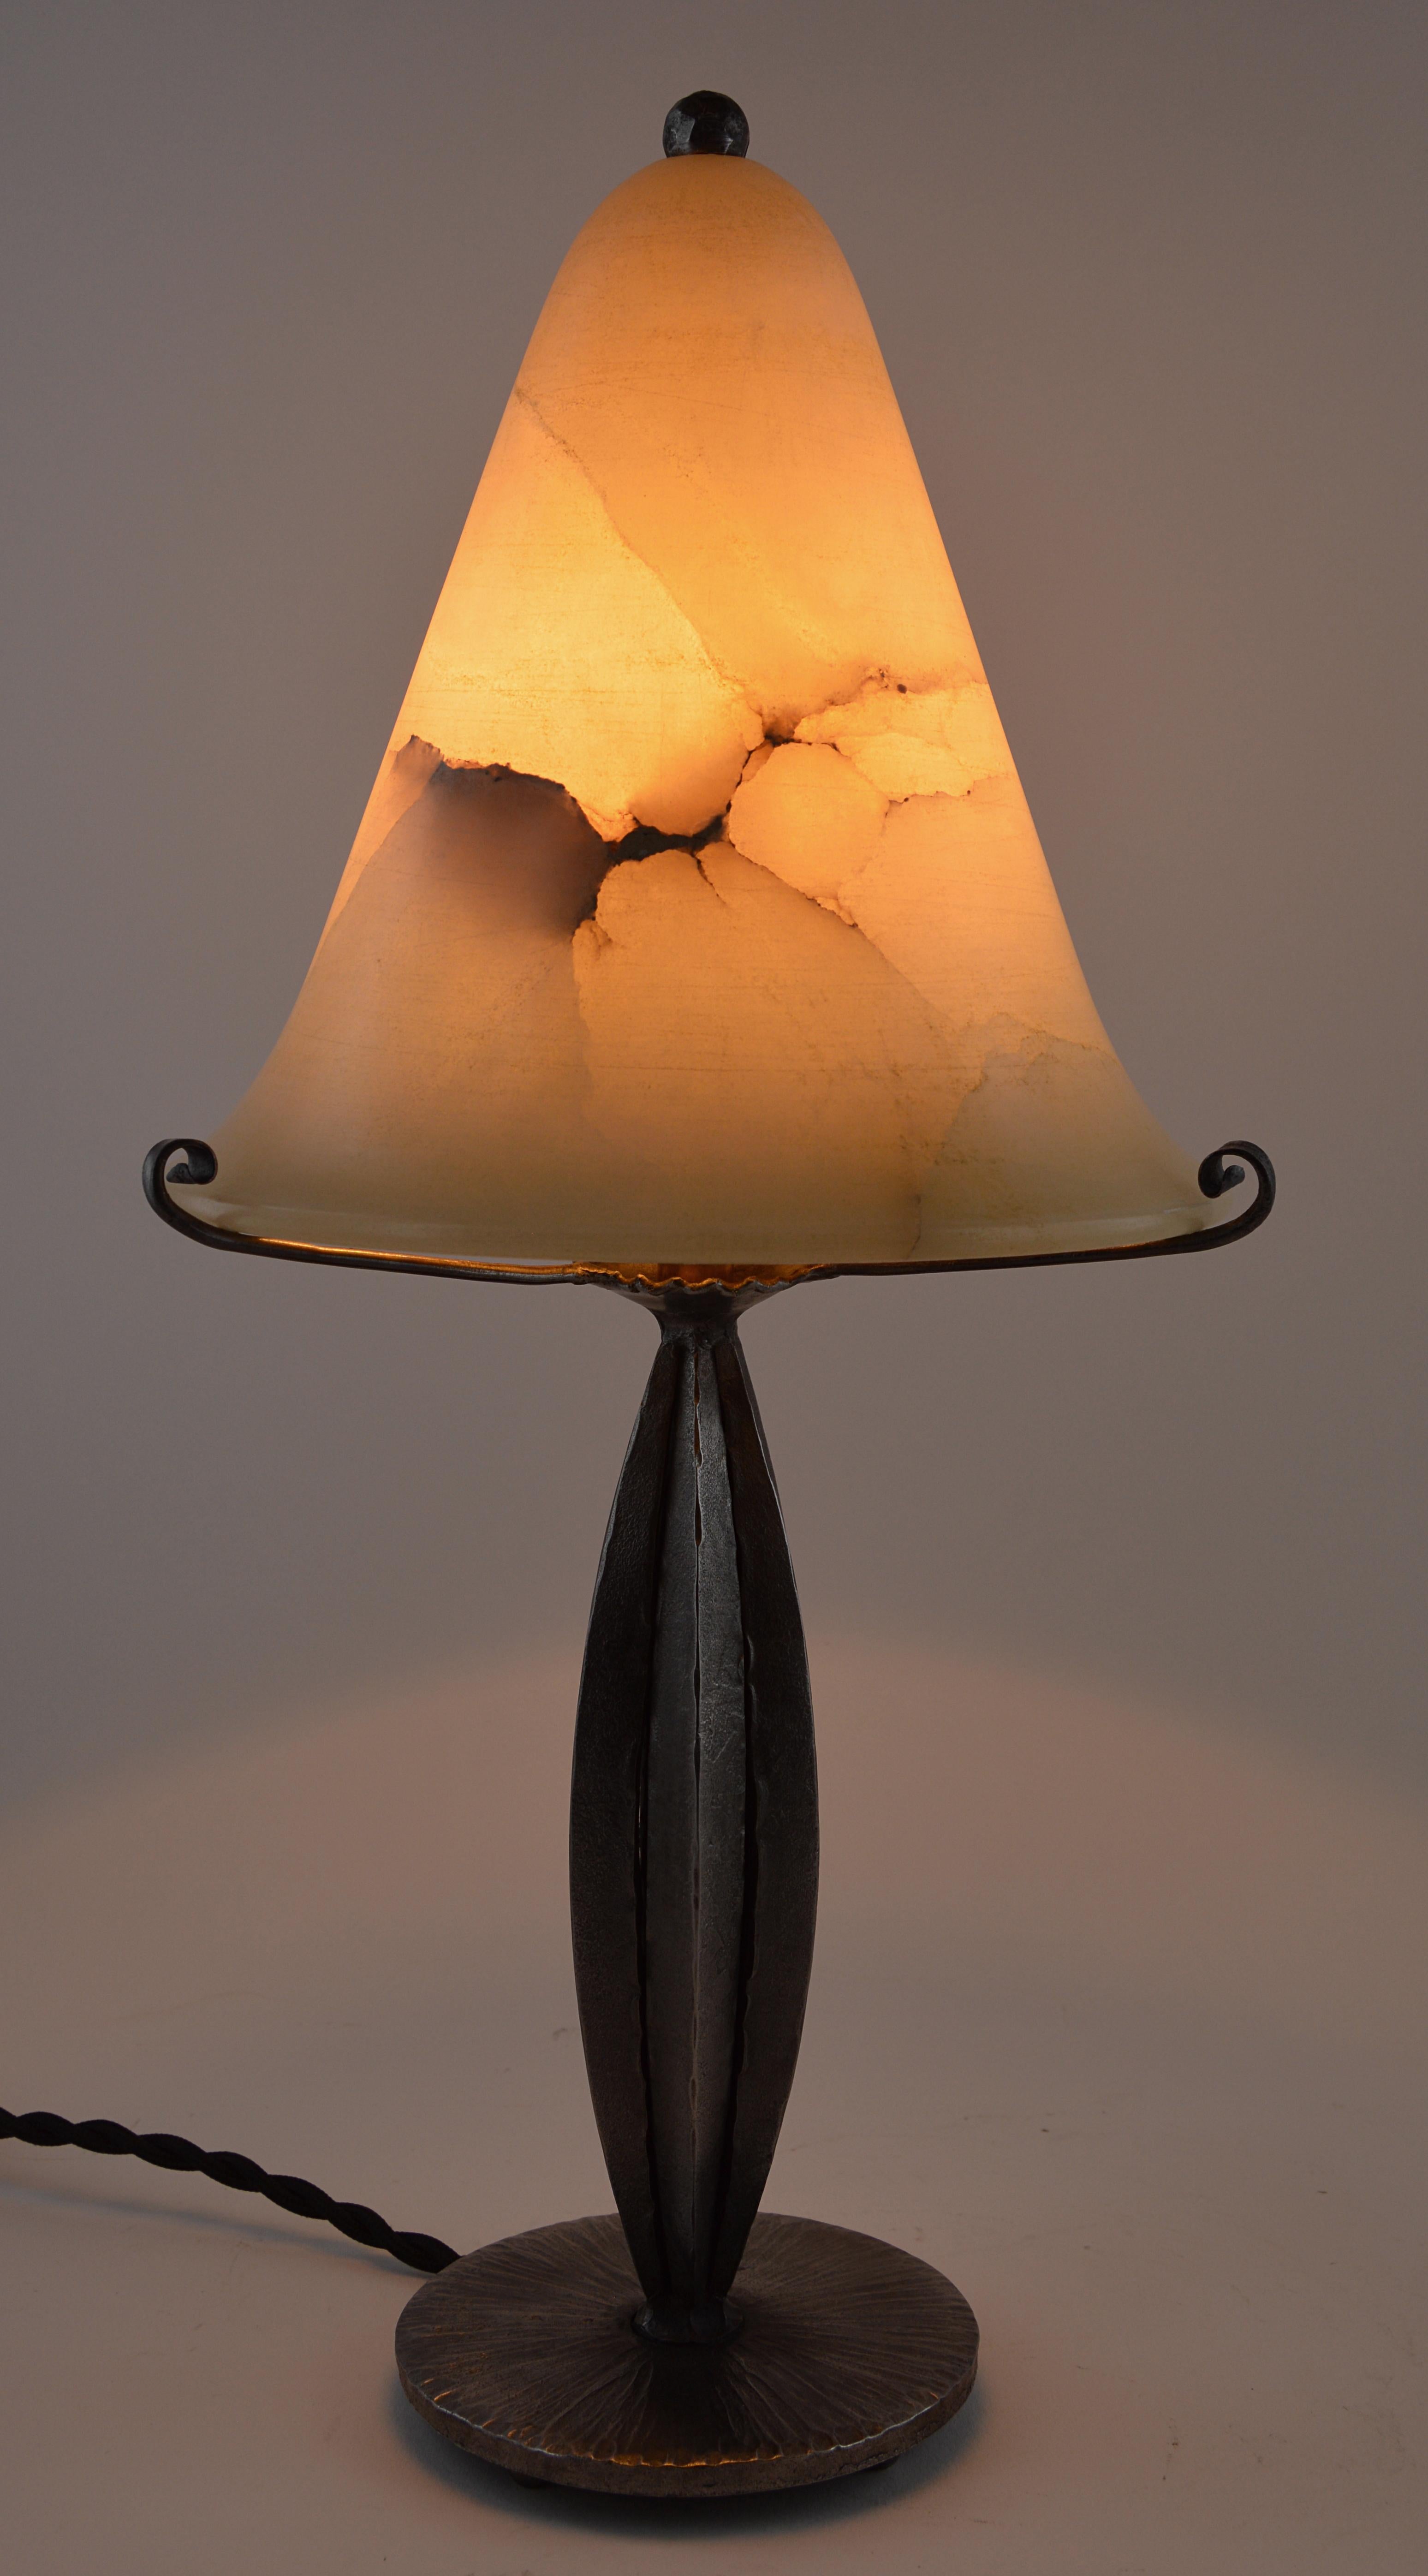 French Art Deco table lamp, France, 1920s. Wrought-iron base. Alabaster shade. Old alabaster cannot be compared to new ones. Old alabaster has veins. Sometimes they can be mistaken for cracks. But they are not cracks, they are veins. Measures: